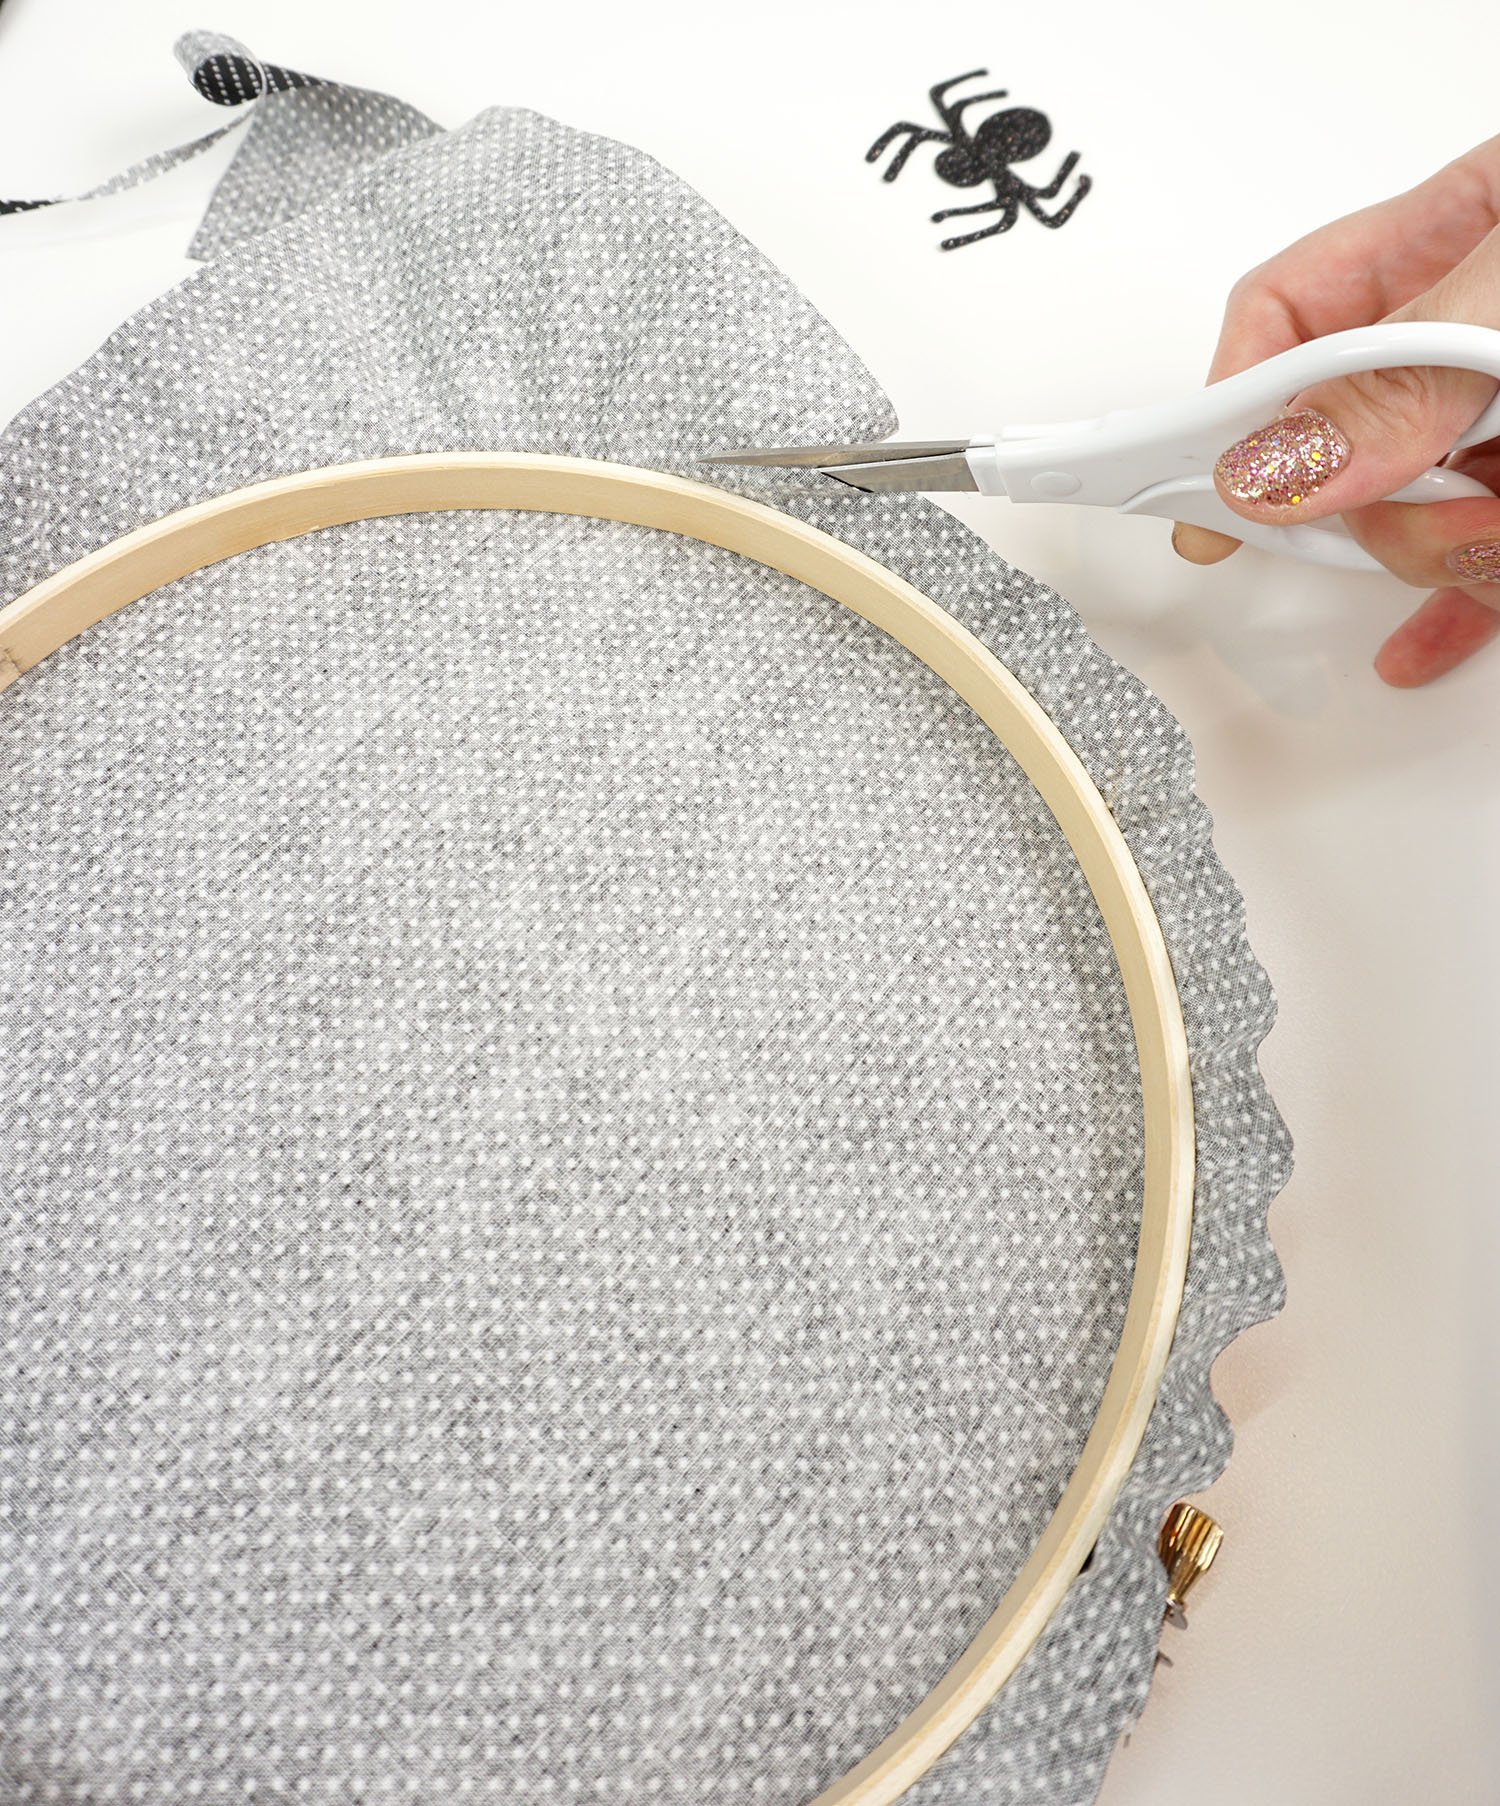 cutting excess material from embroidery hoop